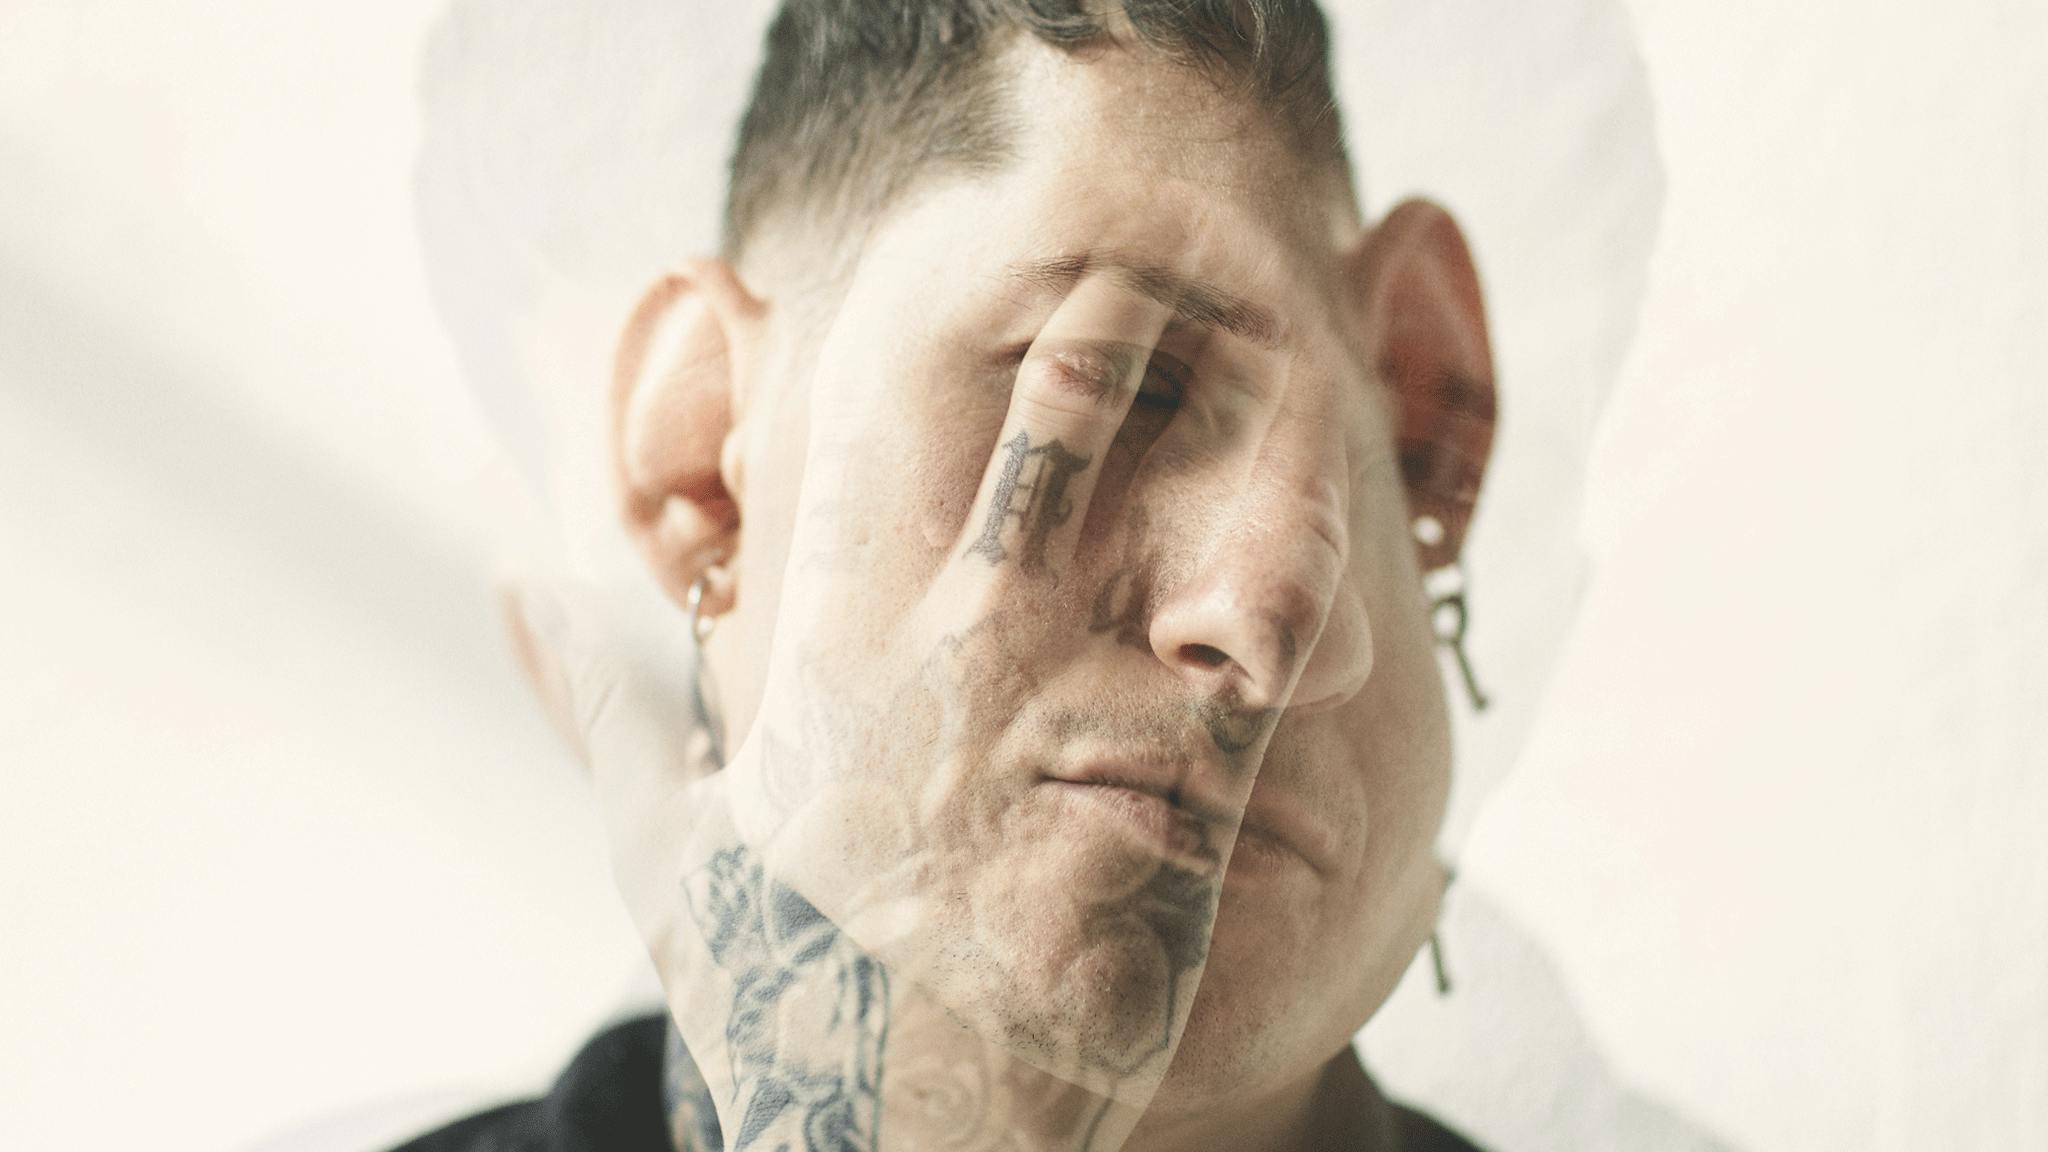 nothing,nowhere.: “I’m embracing authenticity, trusting my instincts… and staying away from the bullsh*t”